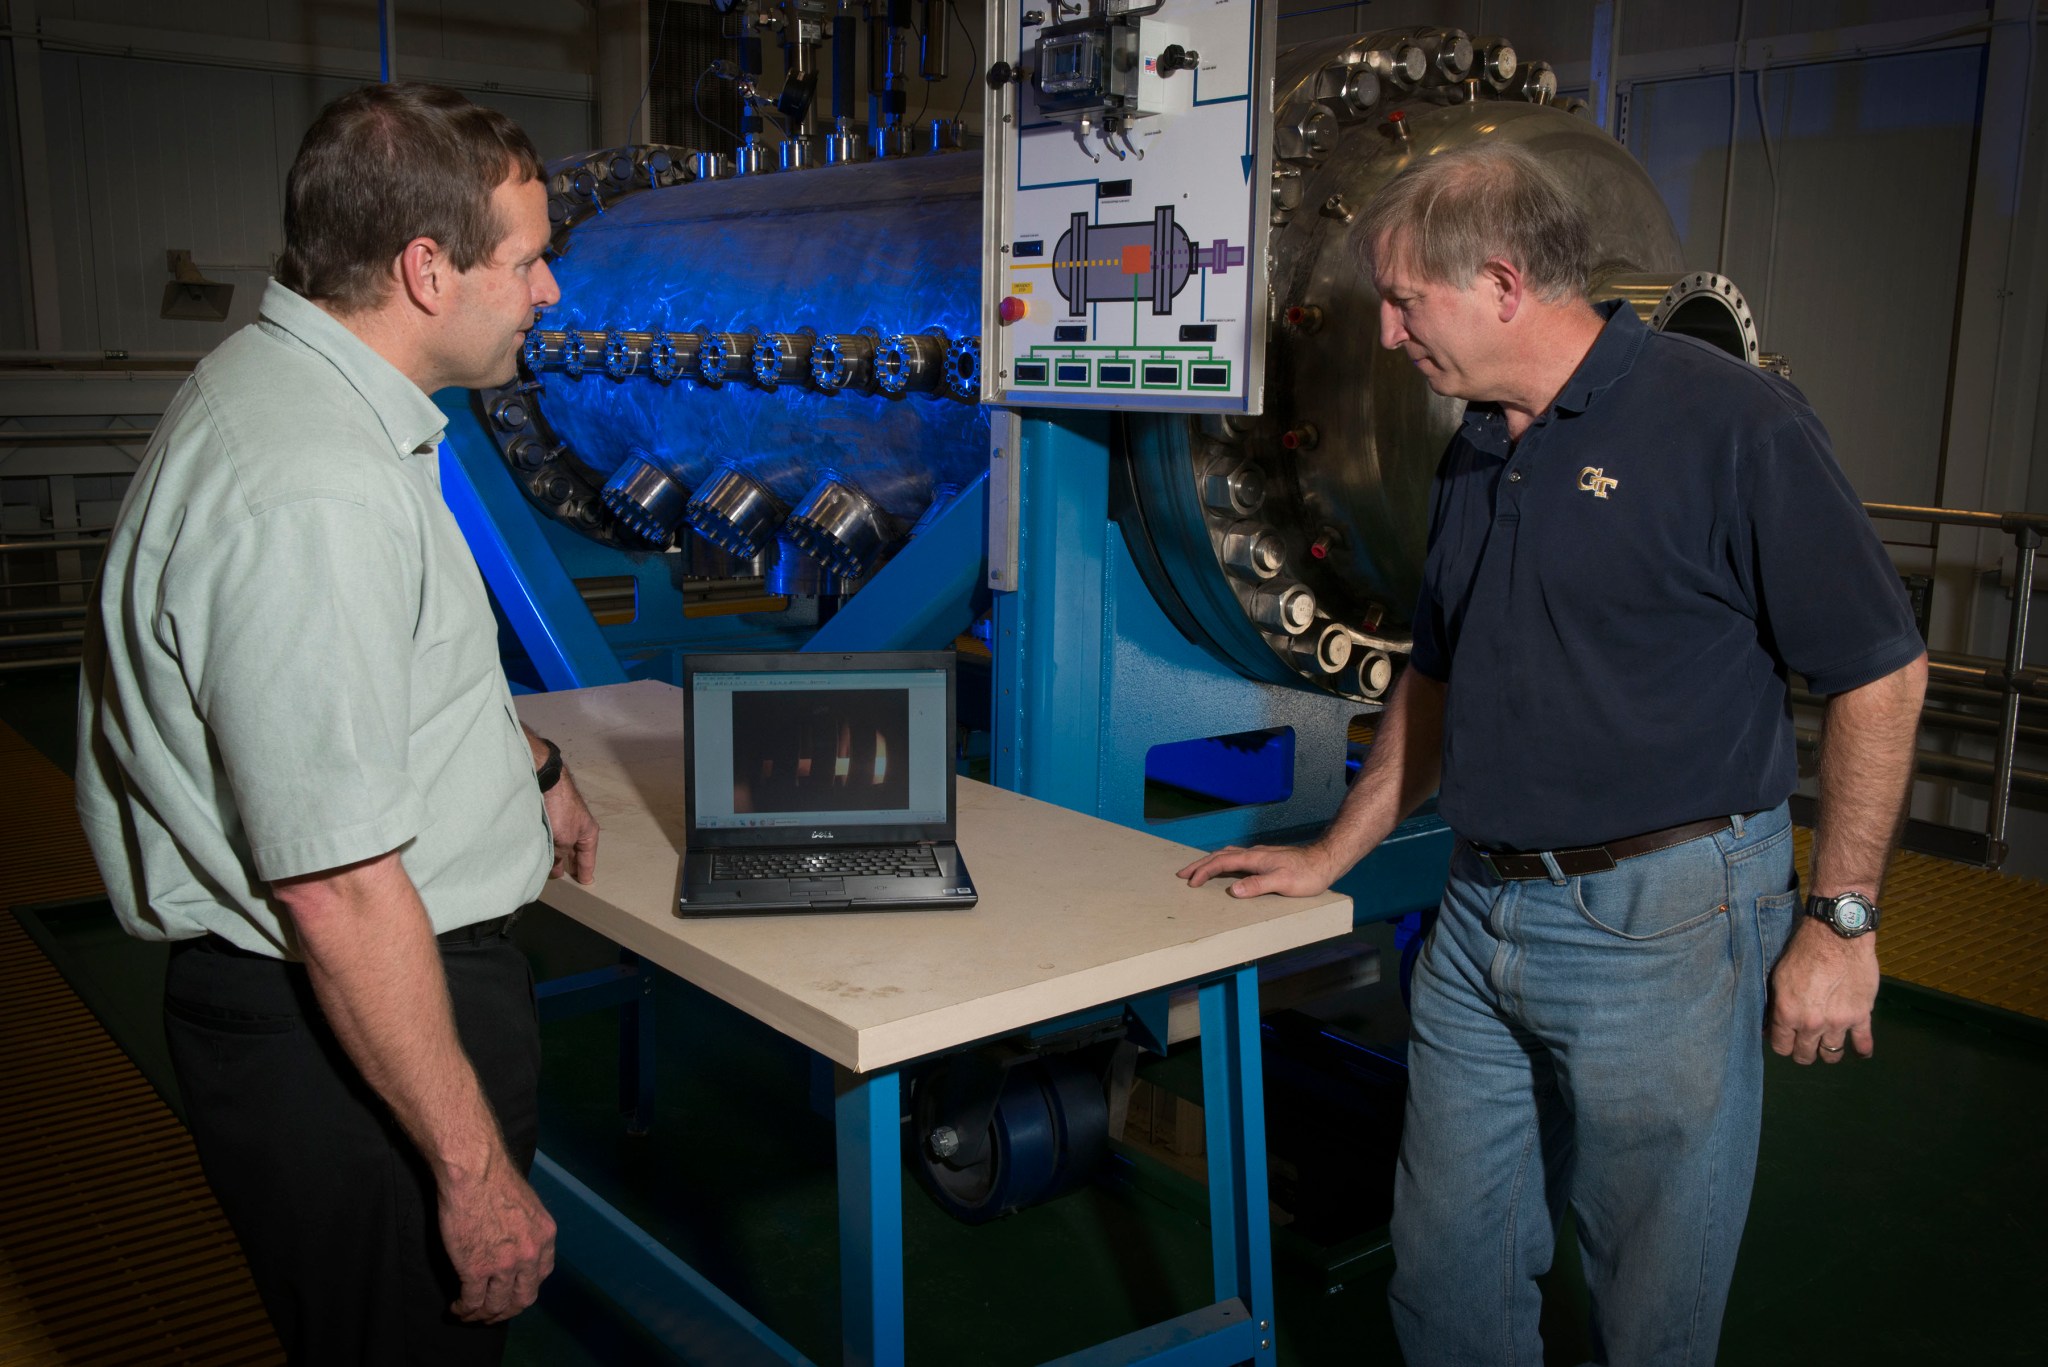 Two men look at a computer on a table in front of Nuclear Thermal Propulsion equipment.